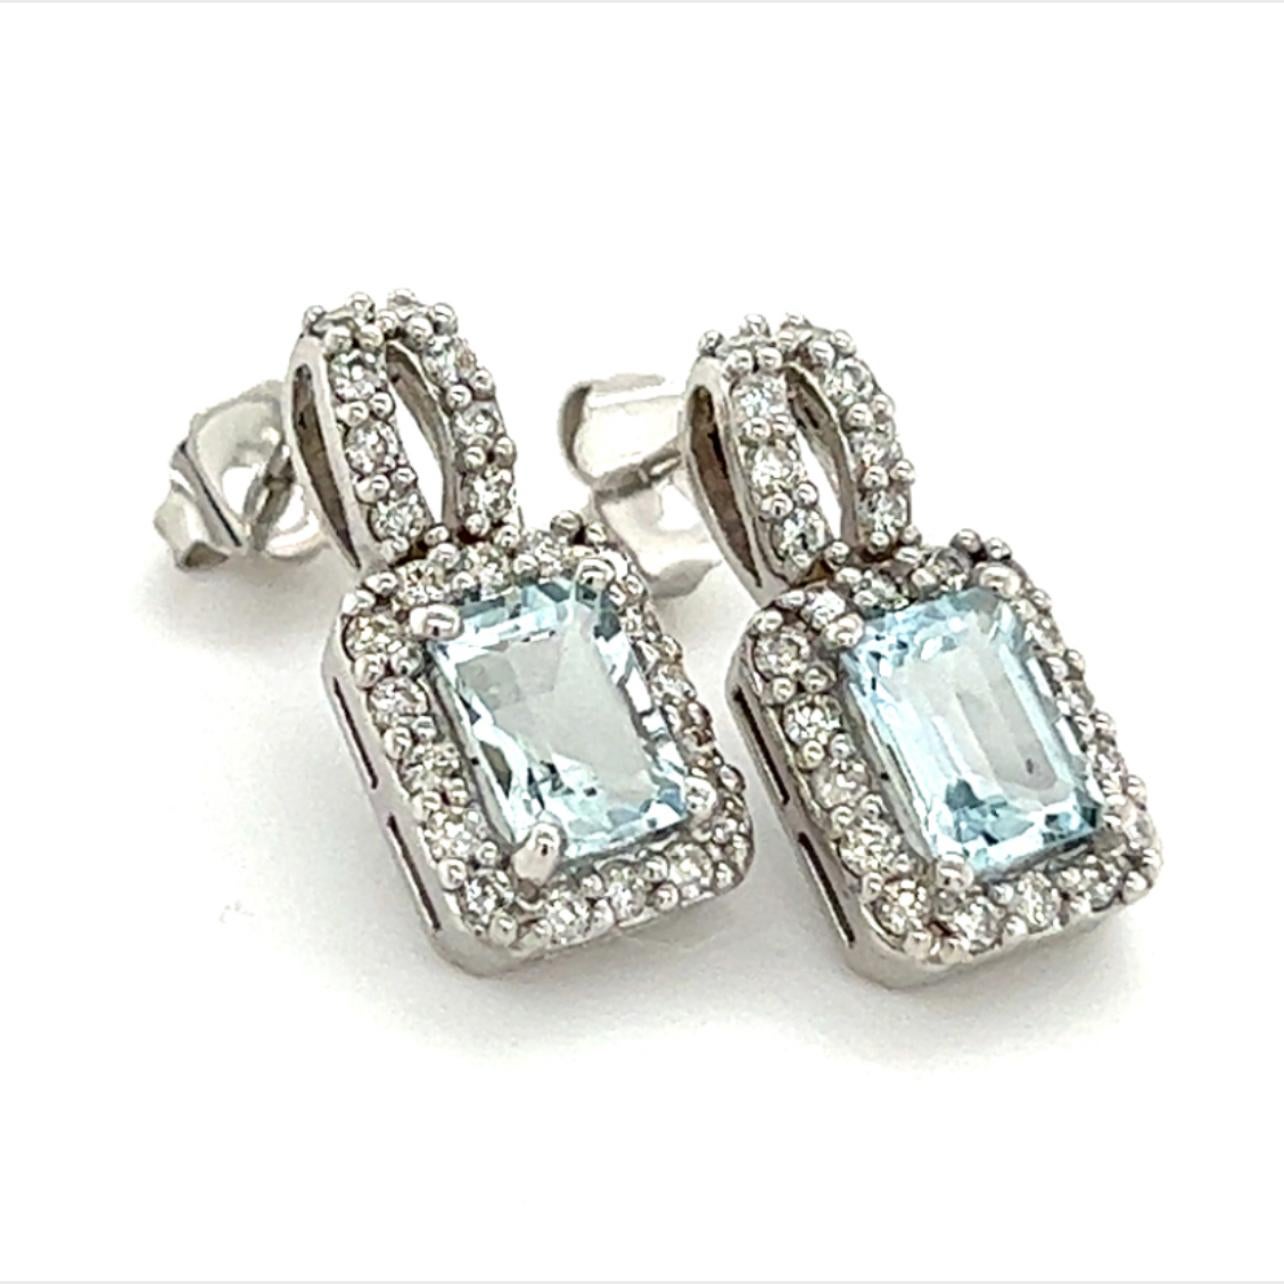 Natural Aquamarine Diamond Earrings 14k Gold 2.38 TCW Certified $4,950 215092

Nothing says, “I Love you” more than Diamonds and Pearls!

These Aquamarine earrings have been Certified, Inspected, and Appraised by Gemological Appraisal